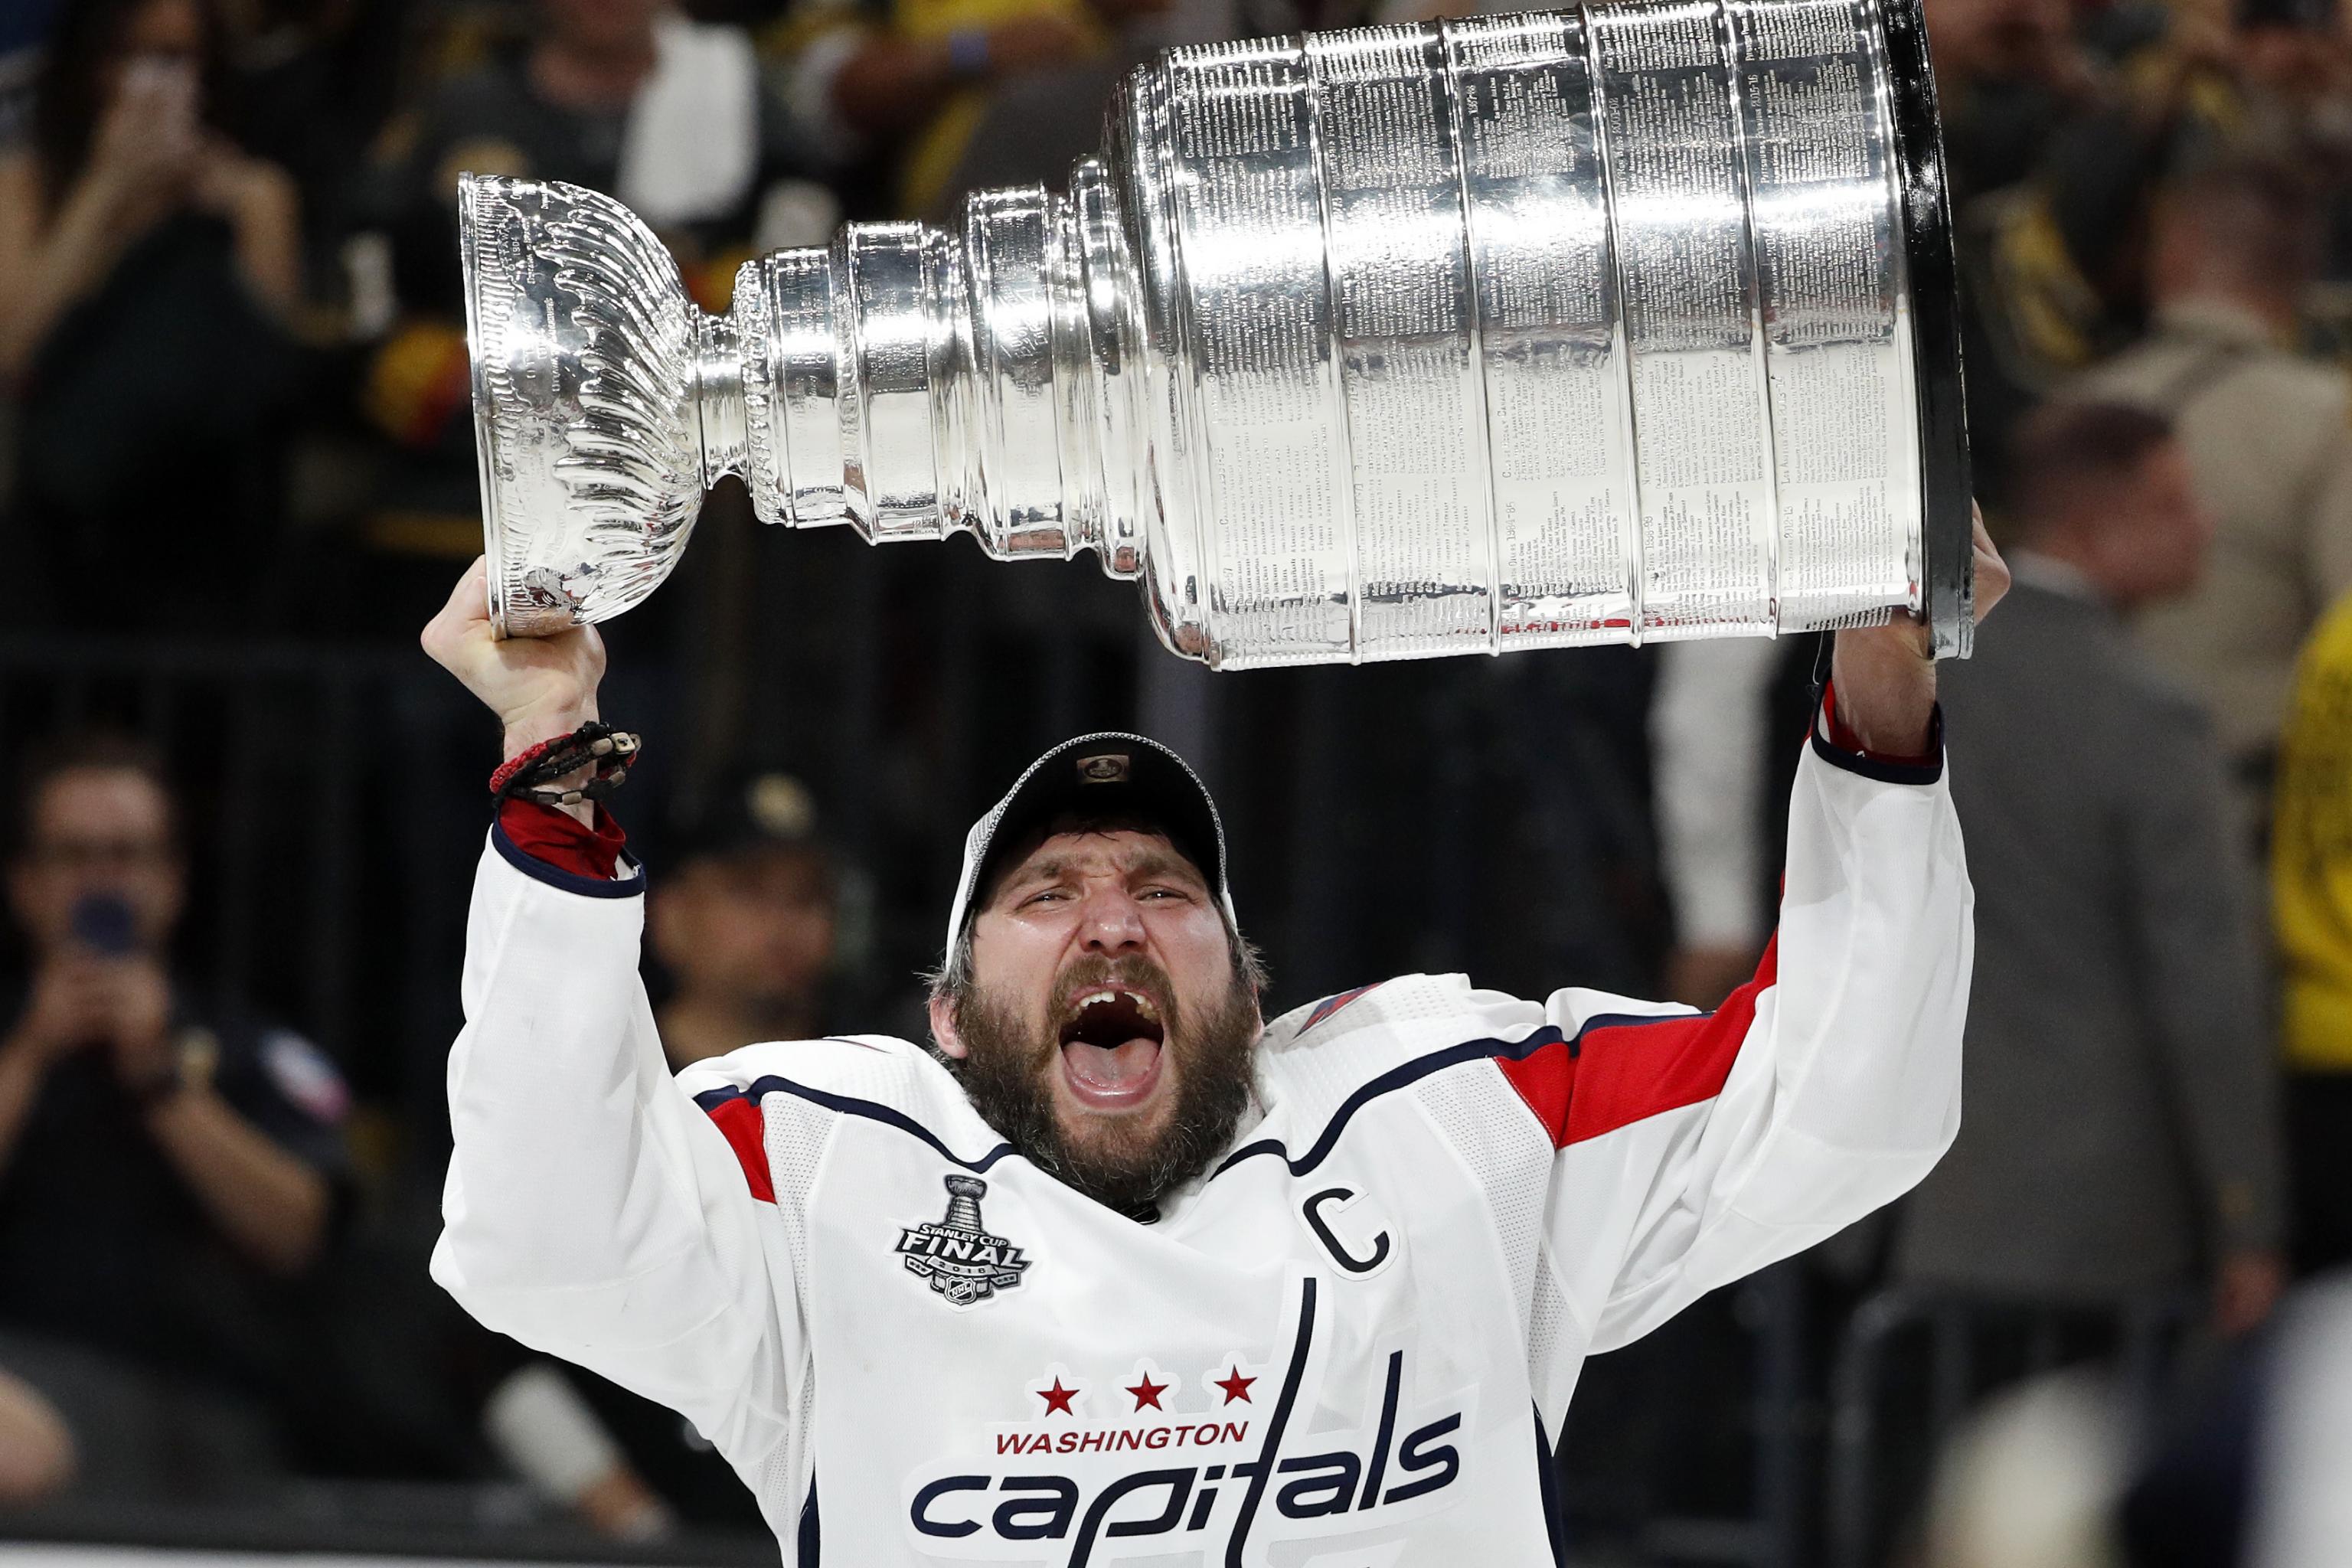 Devante Smith-Pelly will skip White House visit if Capitals win Stanley Cup